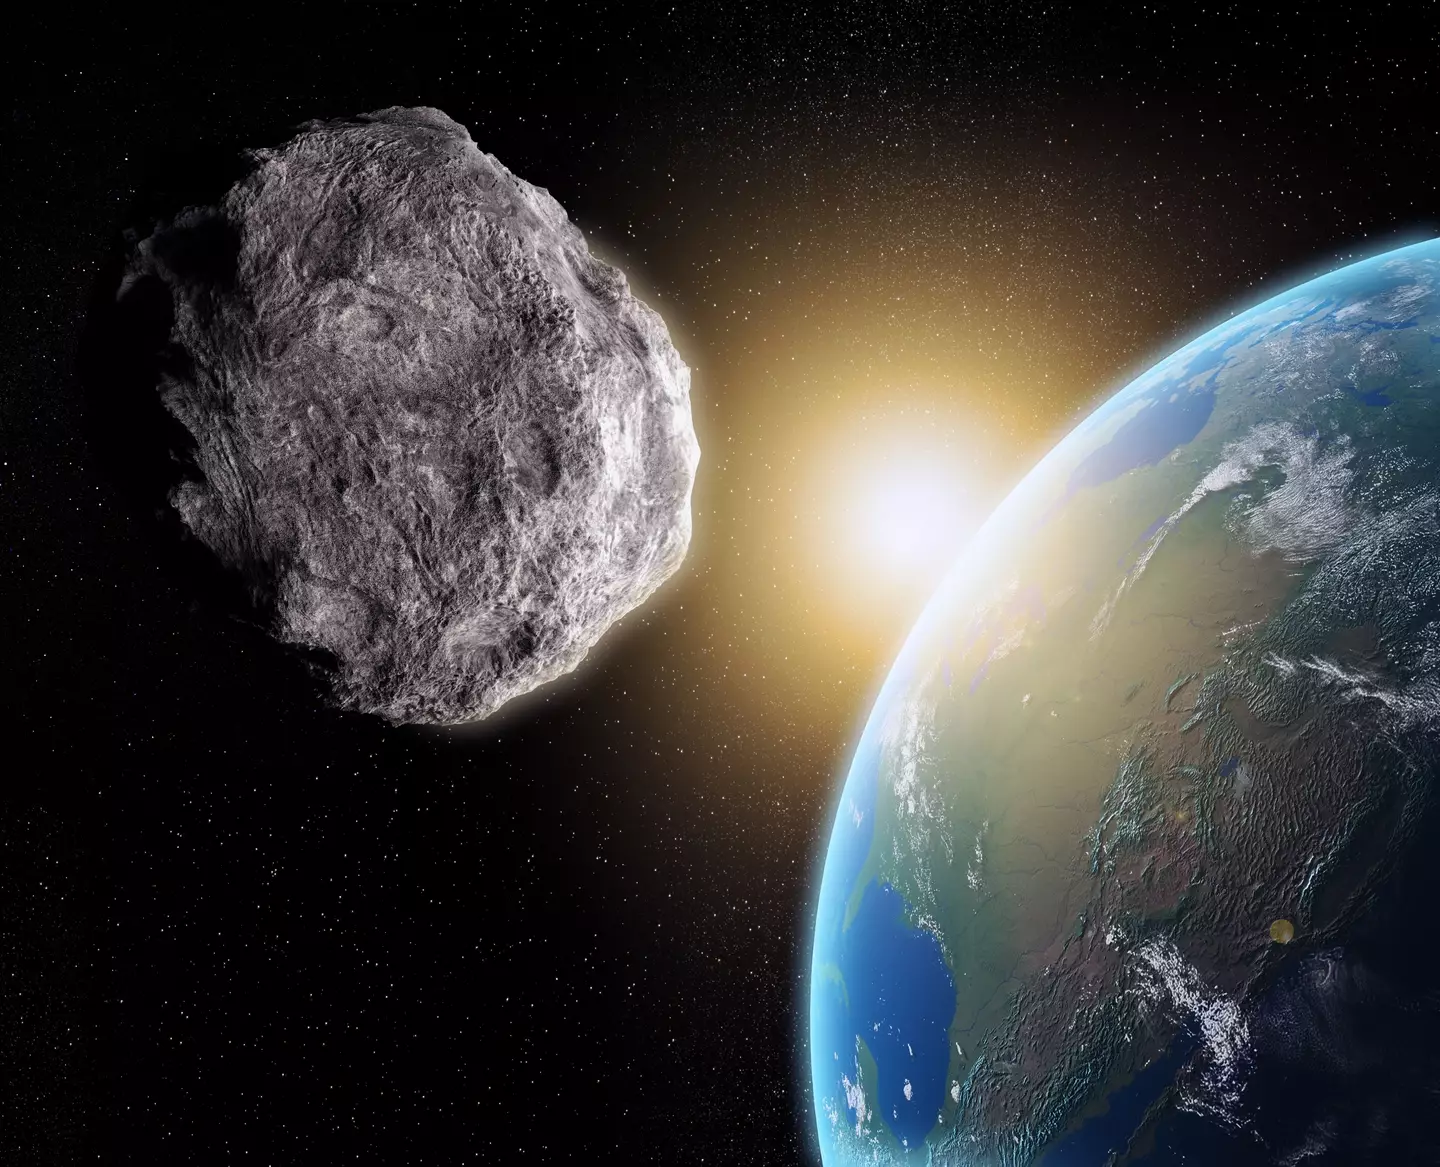 It is hoped the mission could help stop asteroids landing on Earth.